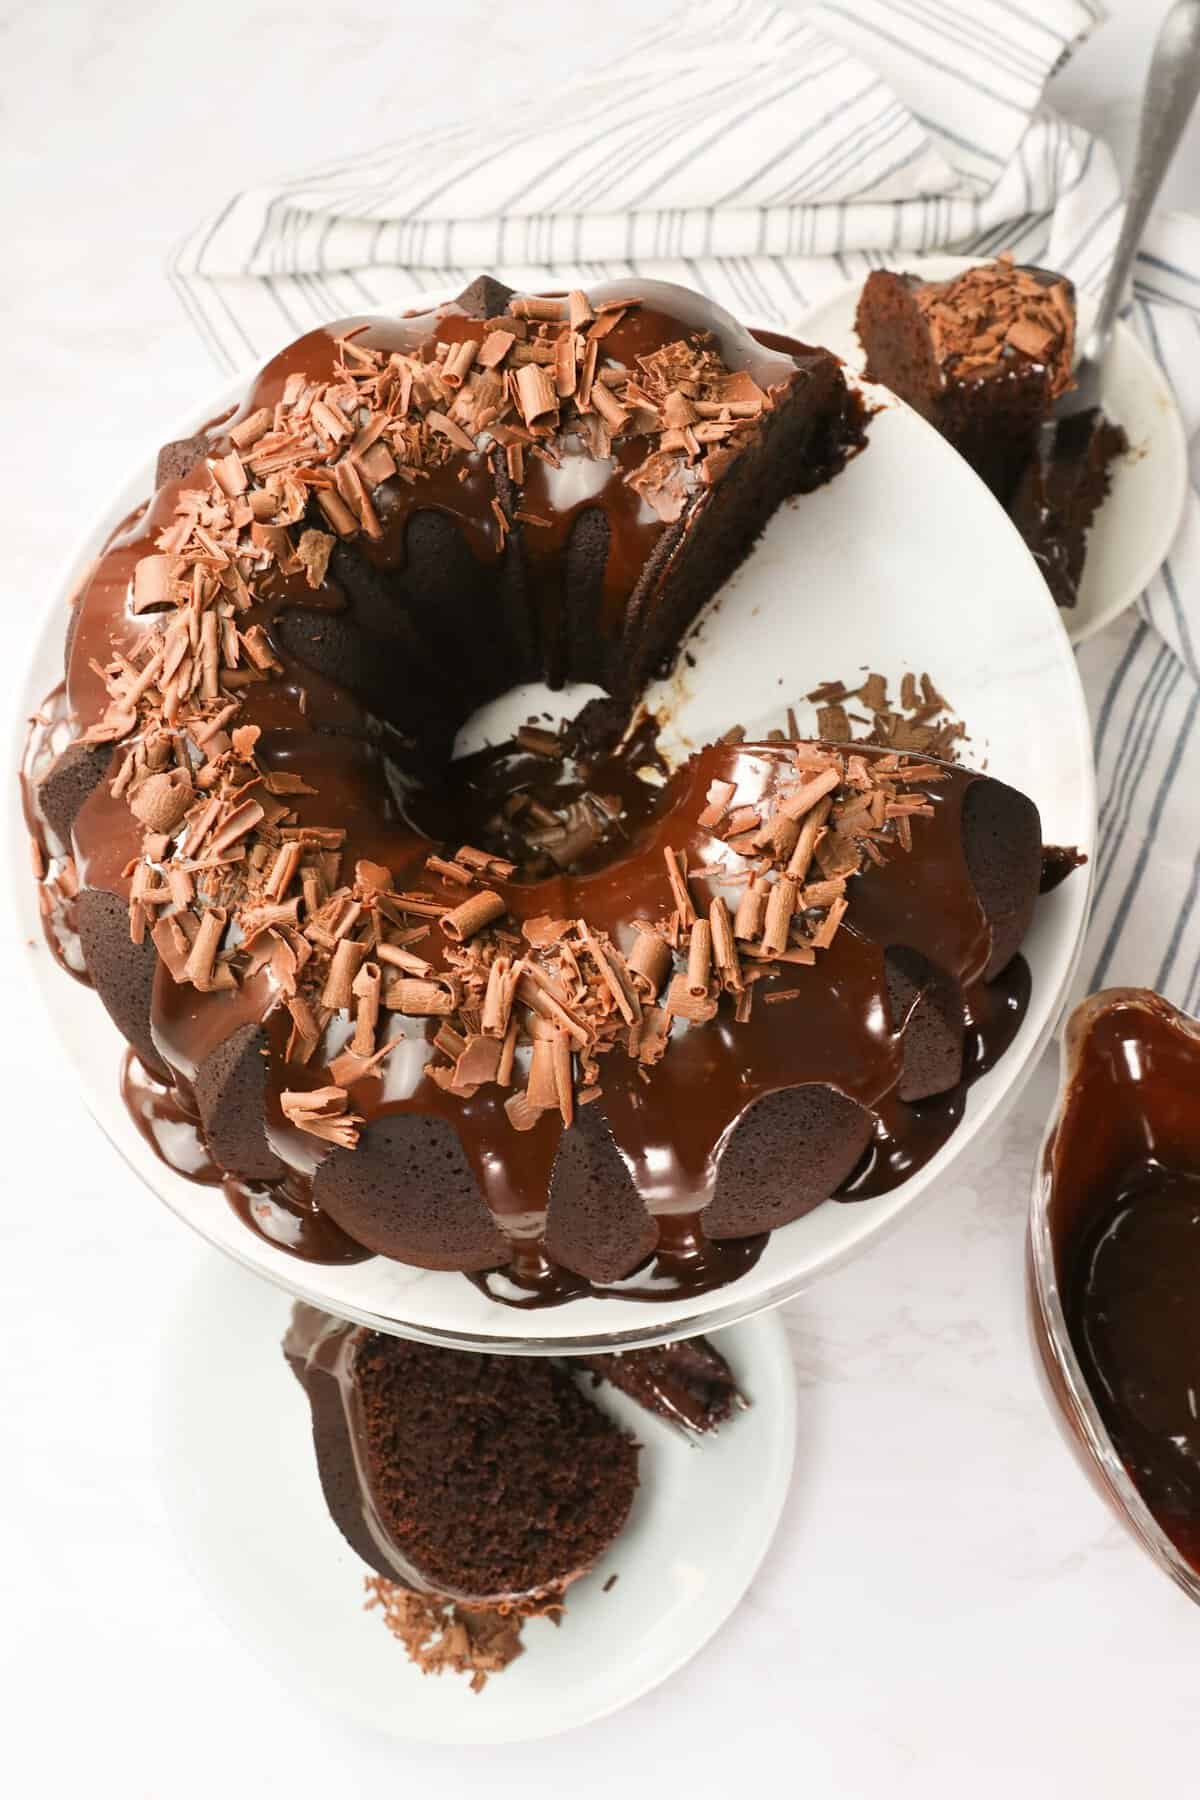 Serving up a slice of freshly frosted chocolate bundt cake for an easy special occasion dessert